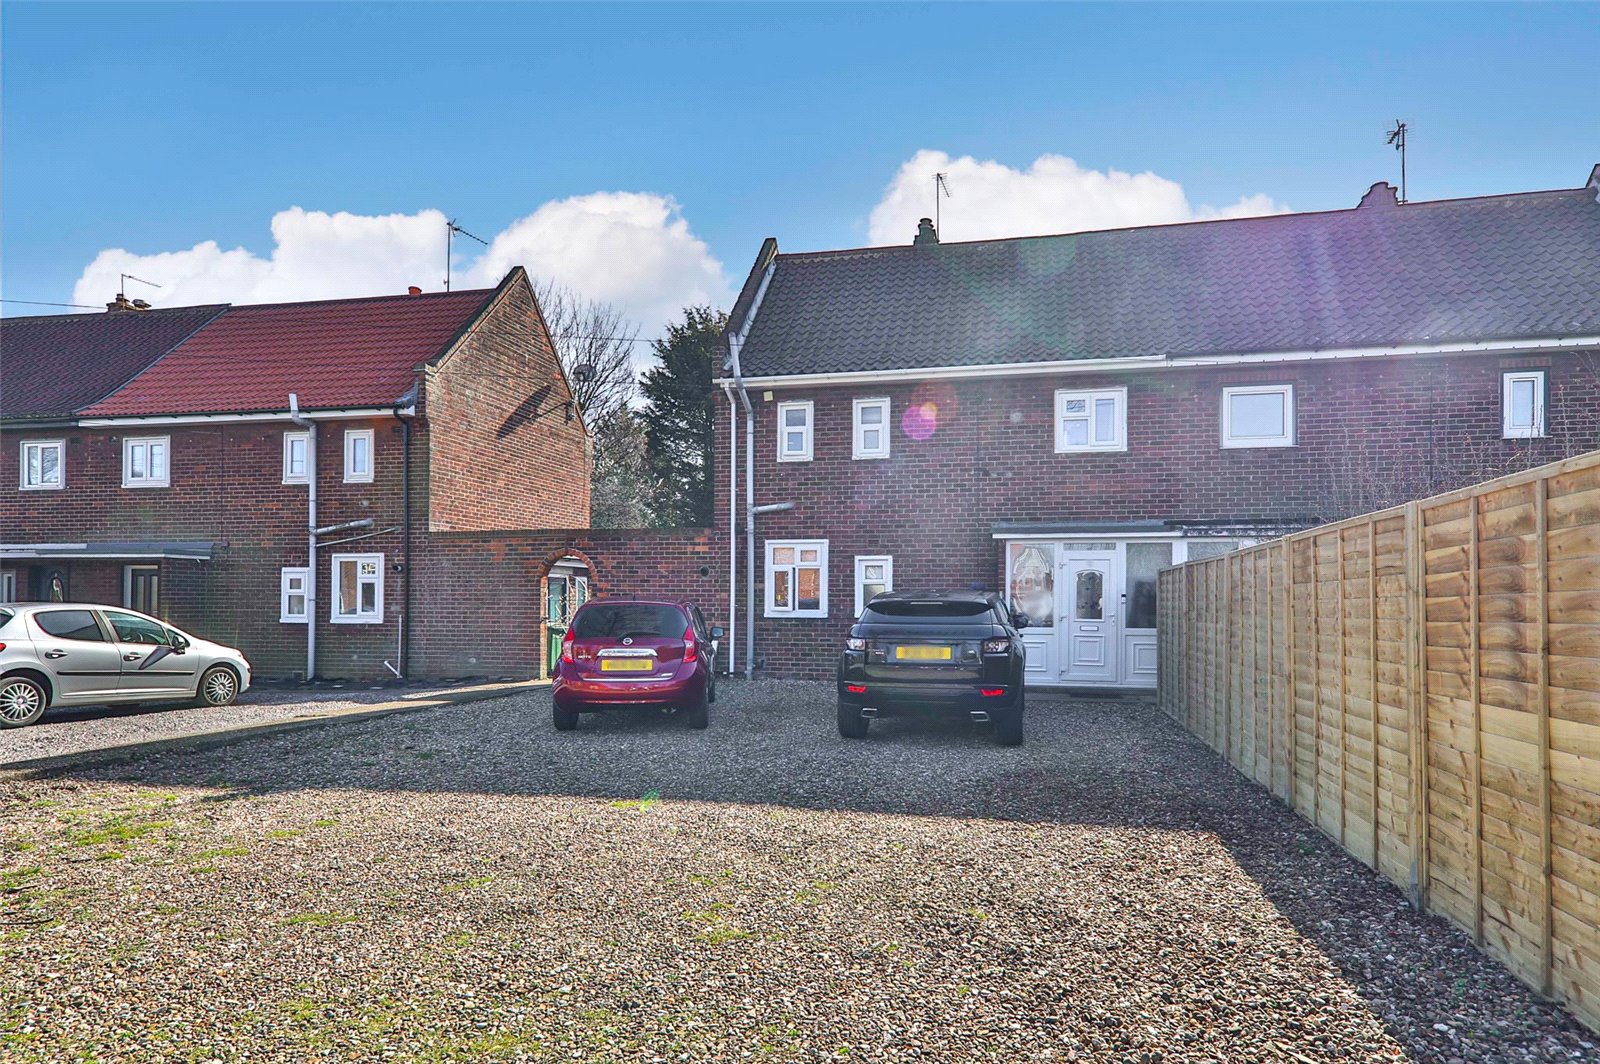 3 bed house for sale in Goths Lane, Beverley  - Property Image 1